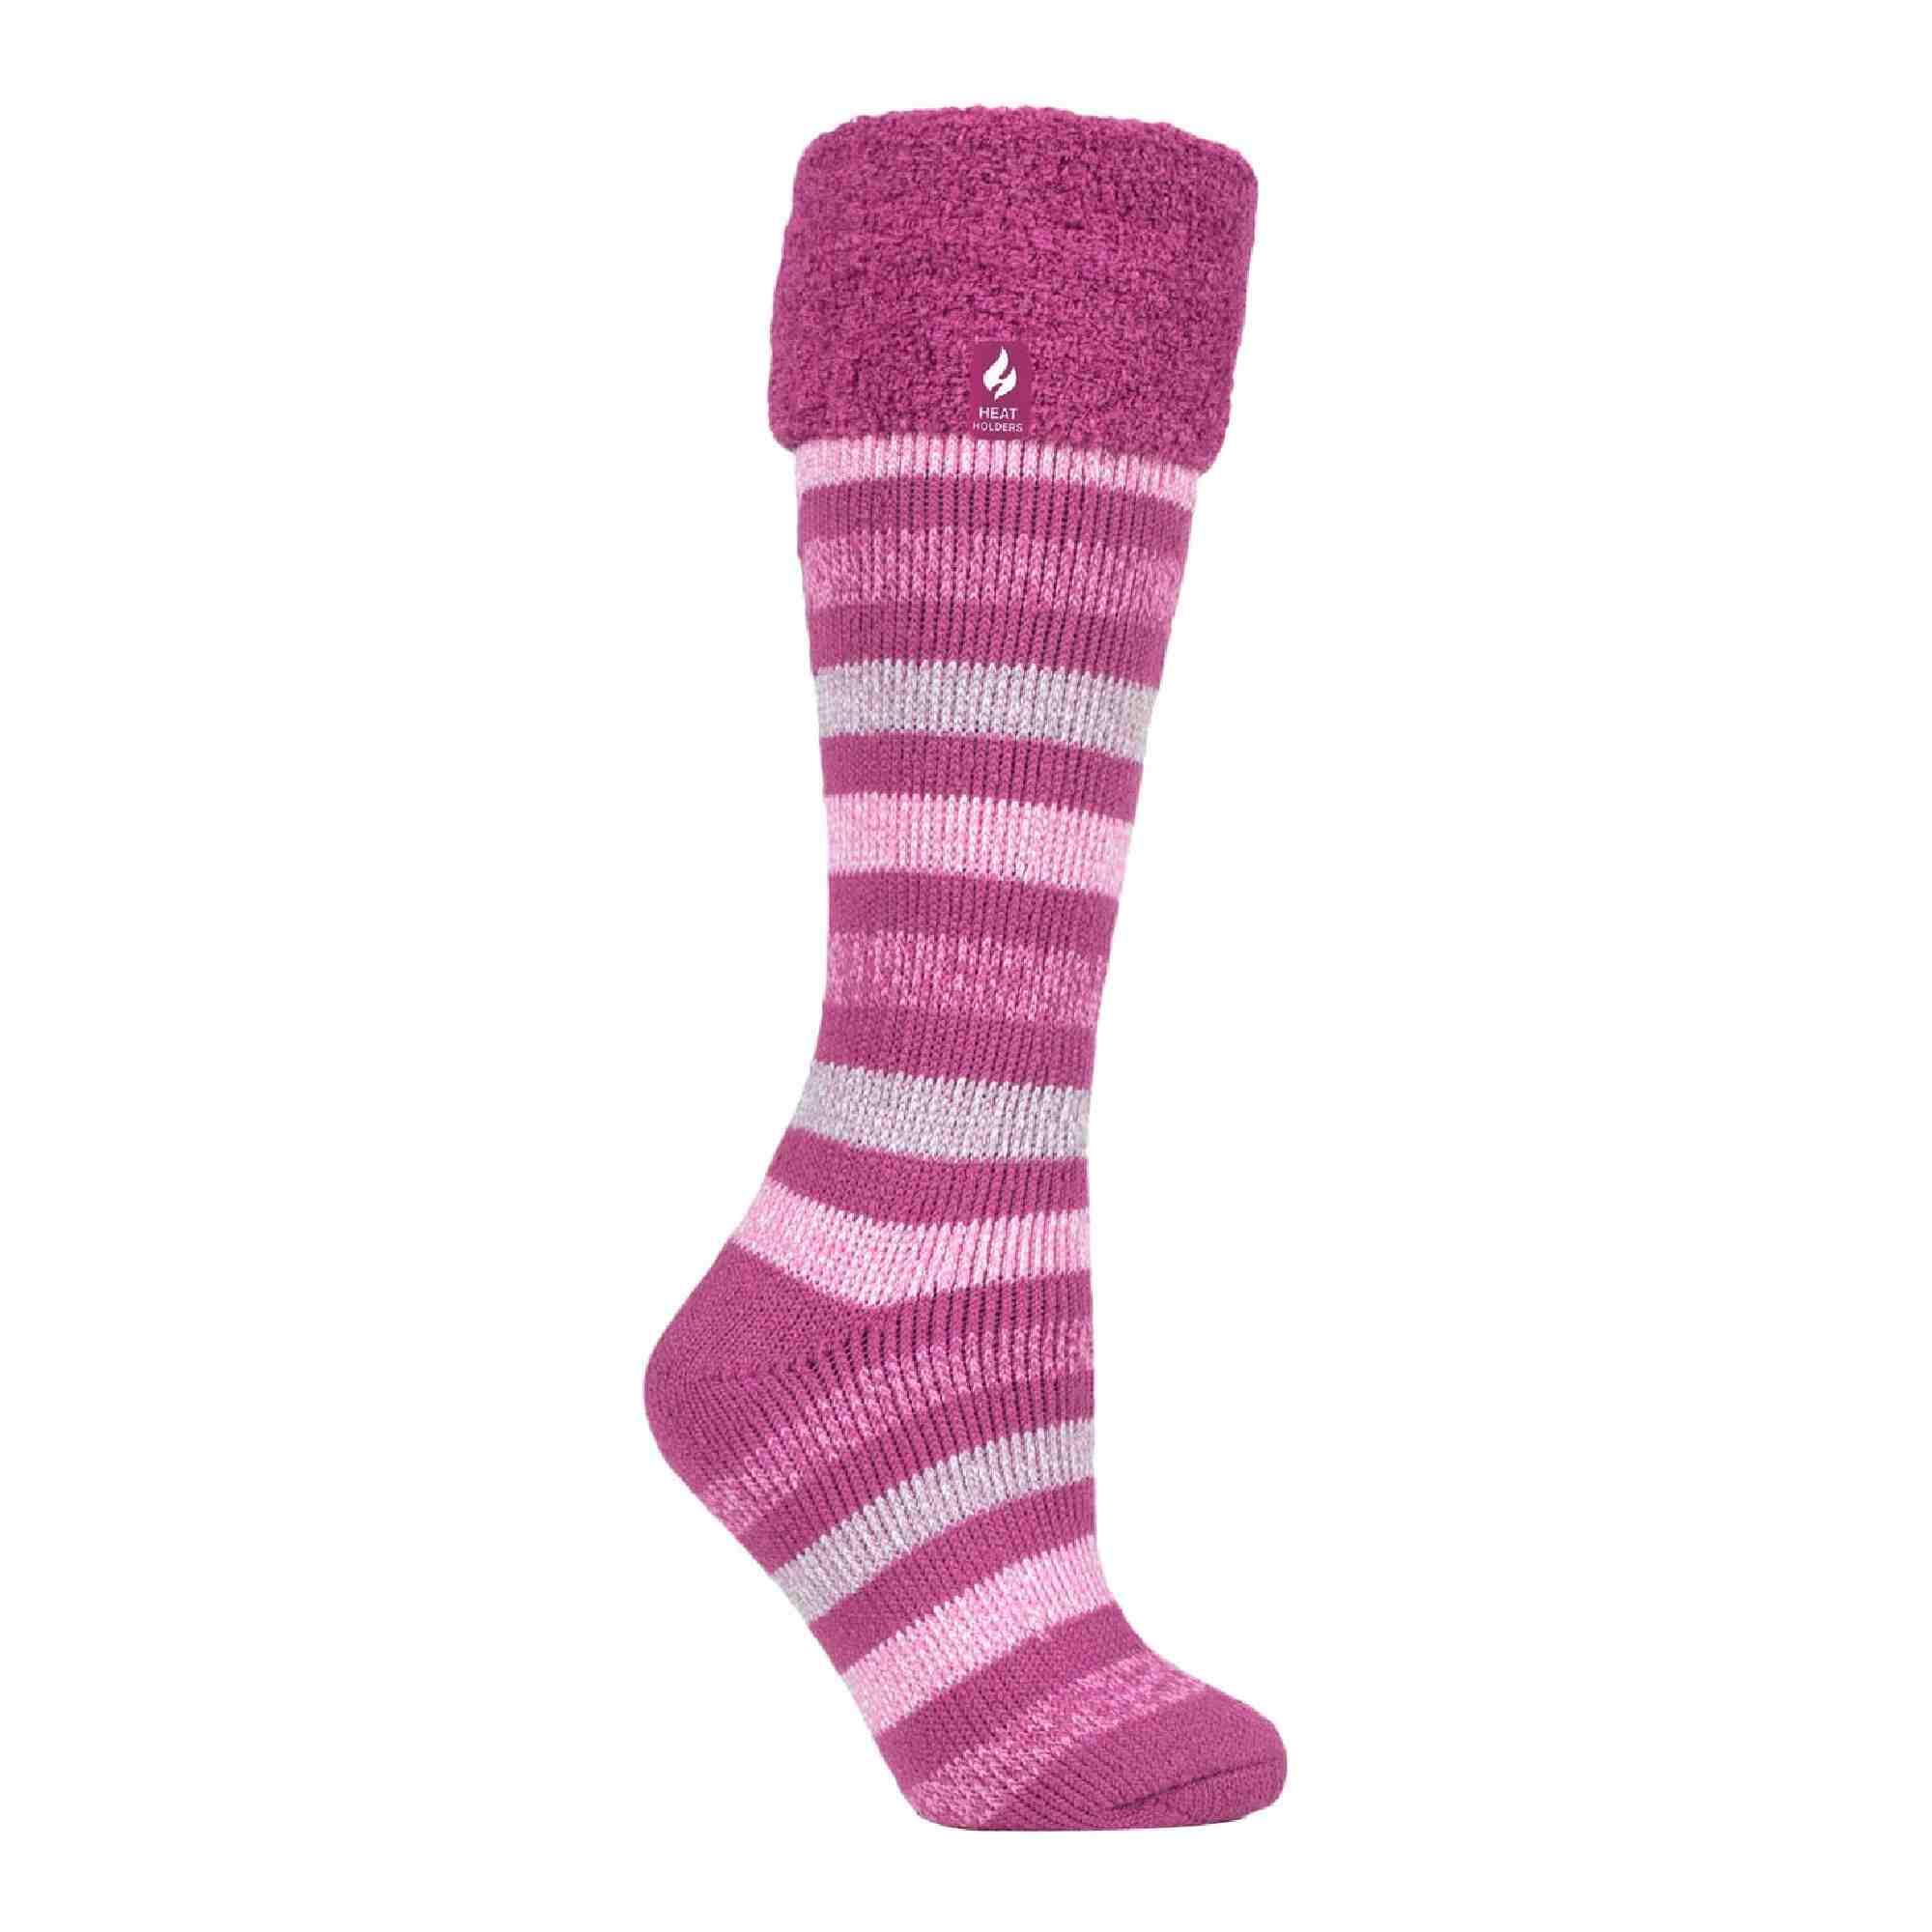 Ladies Multicoloured Striped Patterned Long Wellington Boot Thermal Socks 1/6